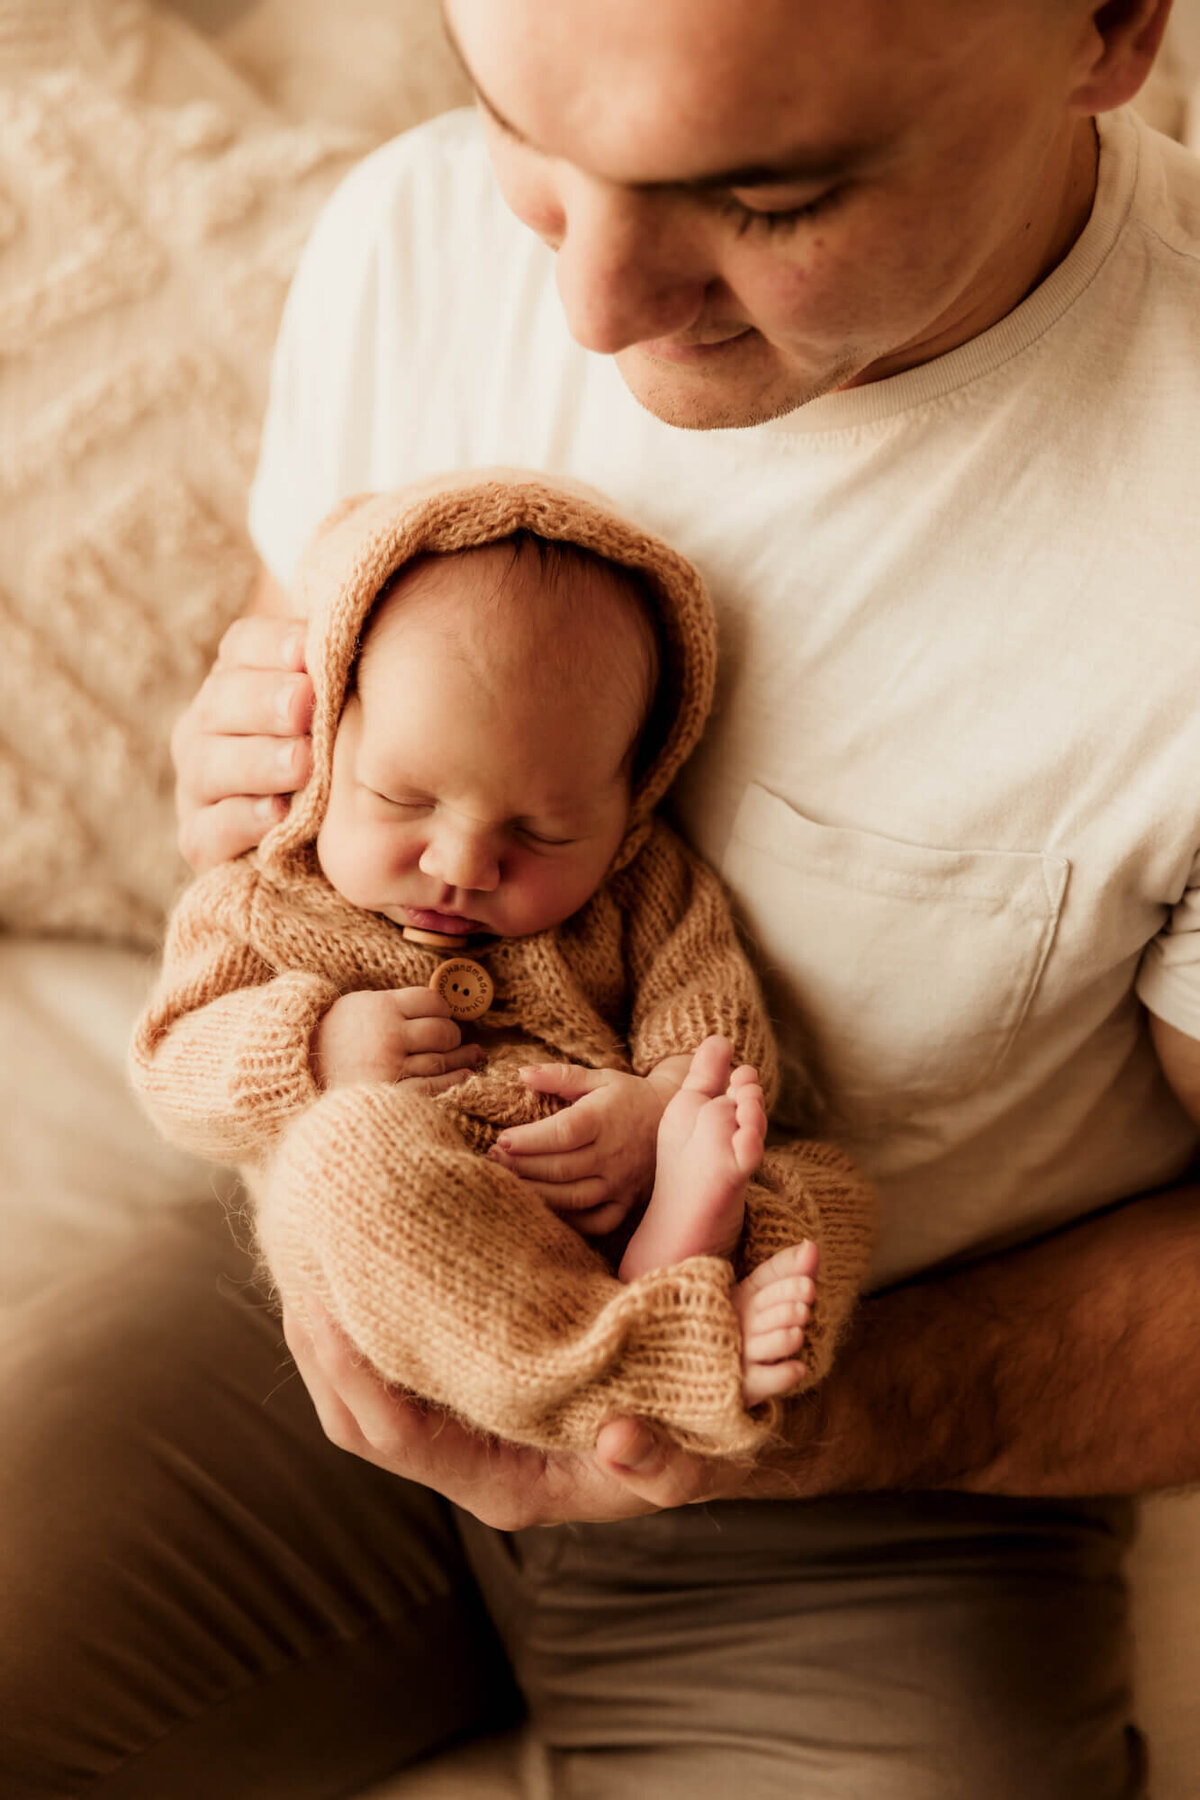 Newborn baby boy being held by his father and sleeping.